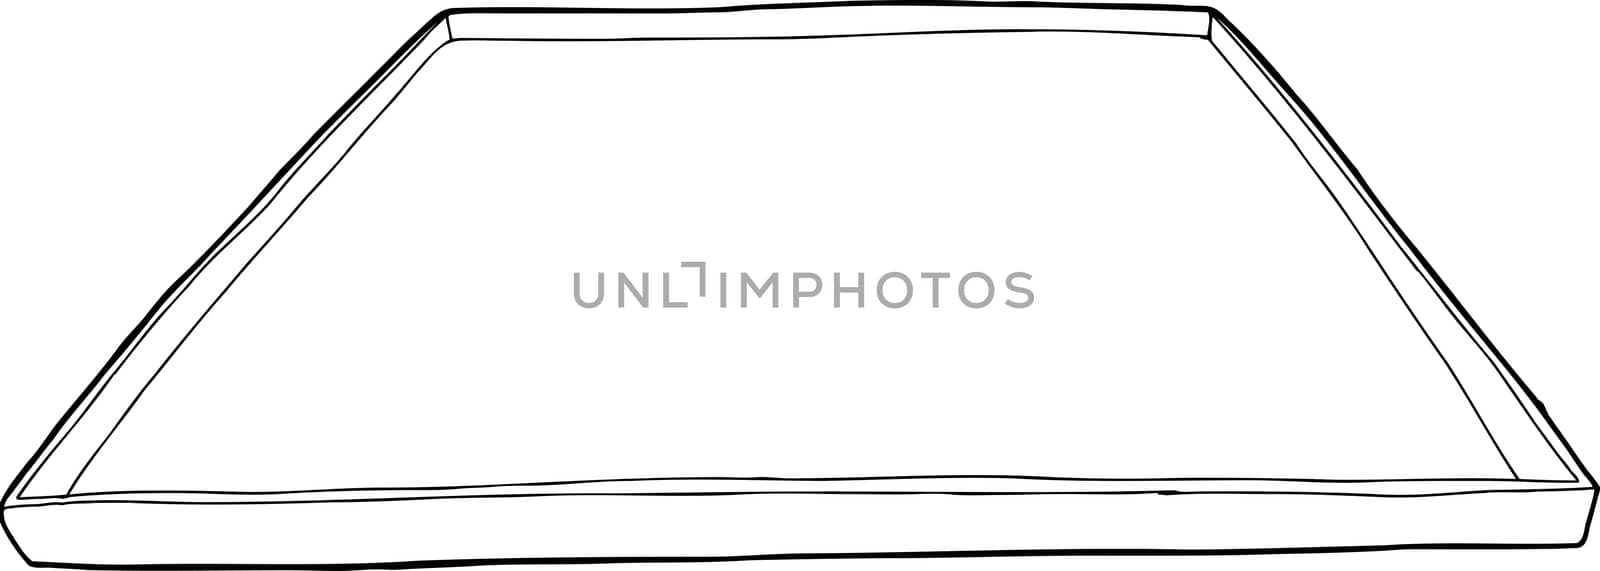 Outline of single empty tray over white background